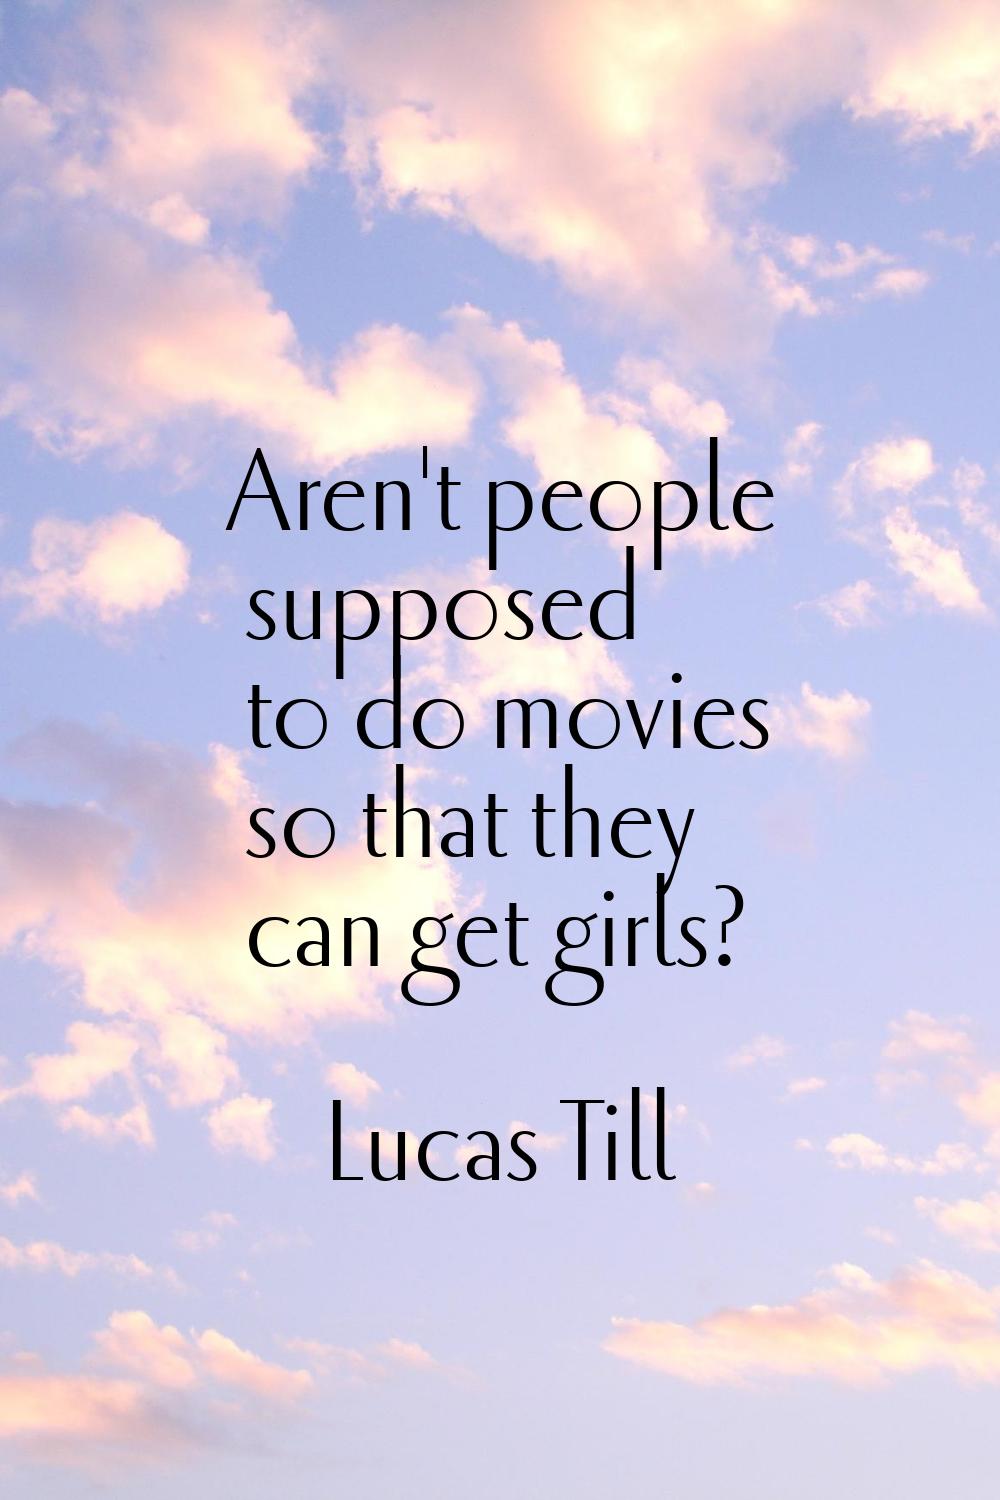 Aren't people supposed to do movies so that they can get girls?